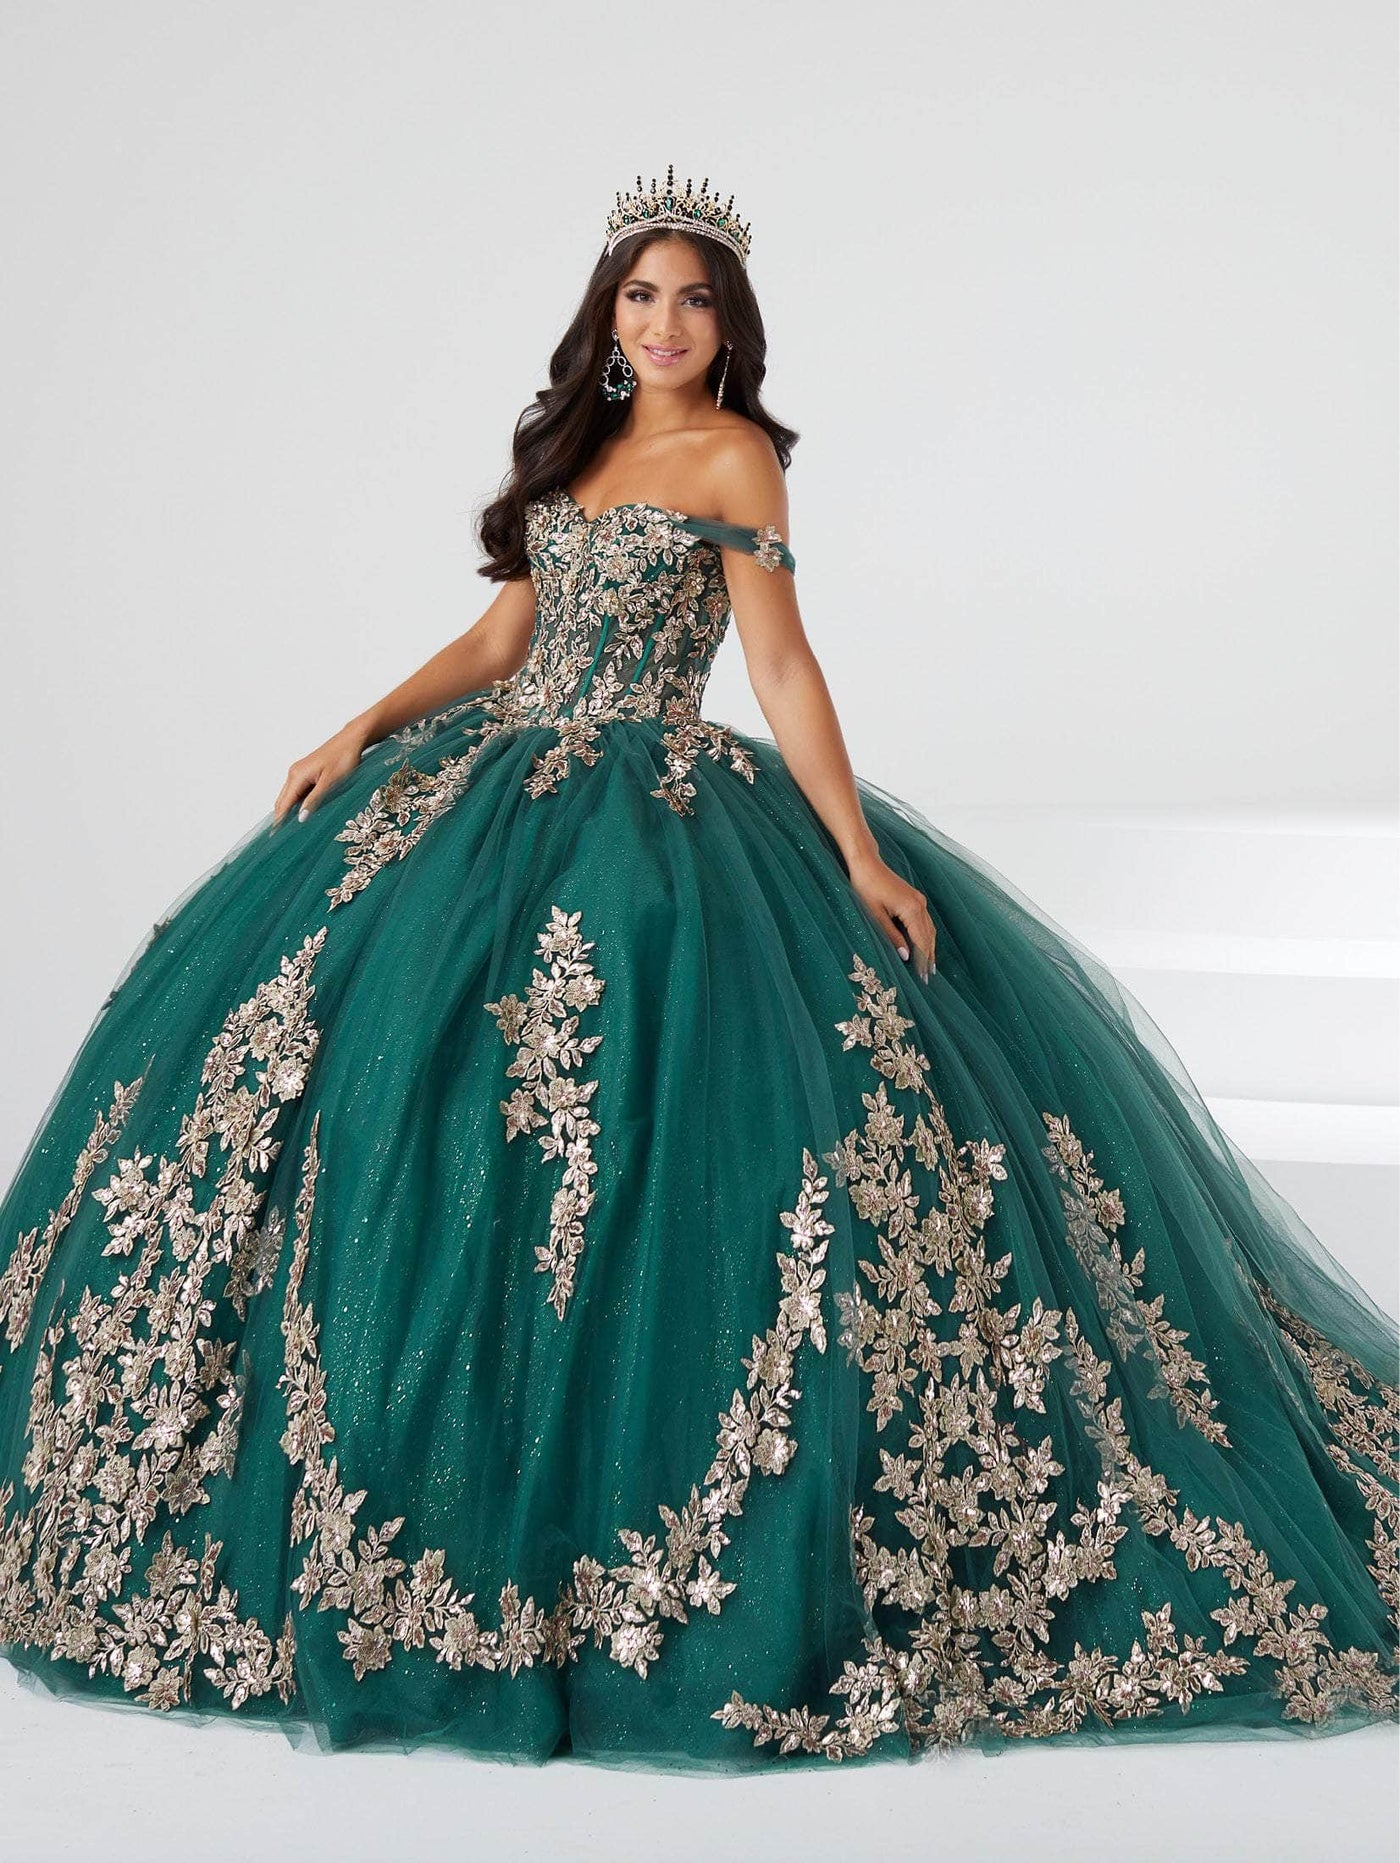 Fiesta Gowns 56461 - Floral Appliqued Quinceanera Dress Special Occasion Dress